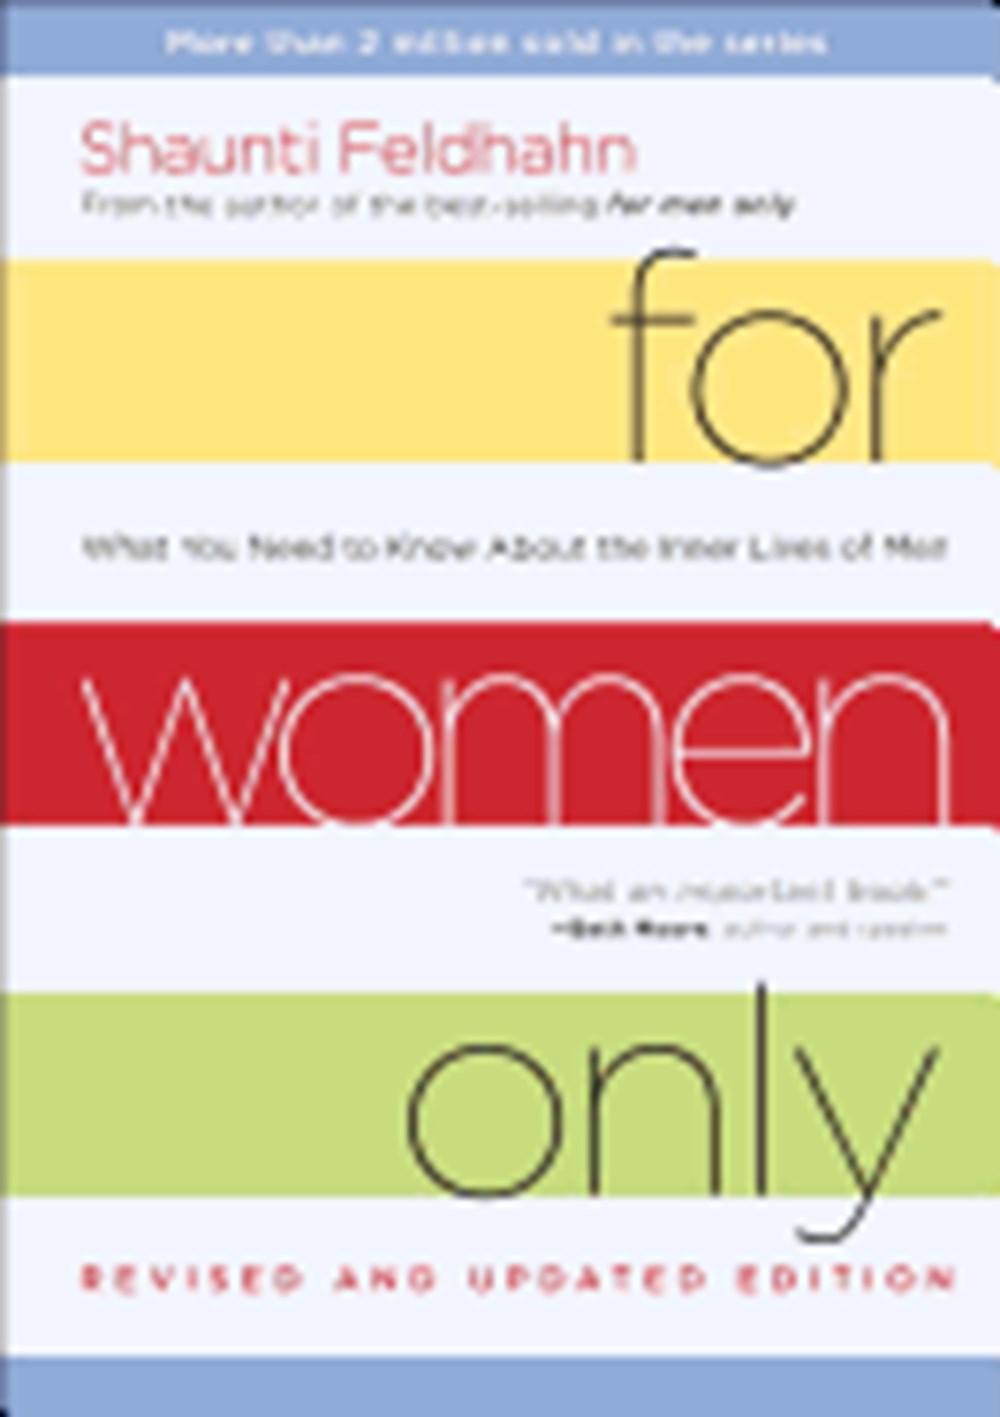 For Women Only: What You Need to Know about the Inner Lives of Men (Revised, Updated)